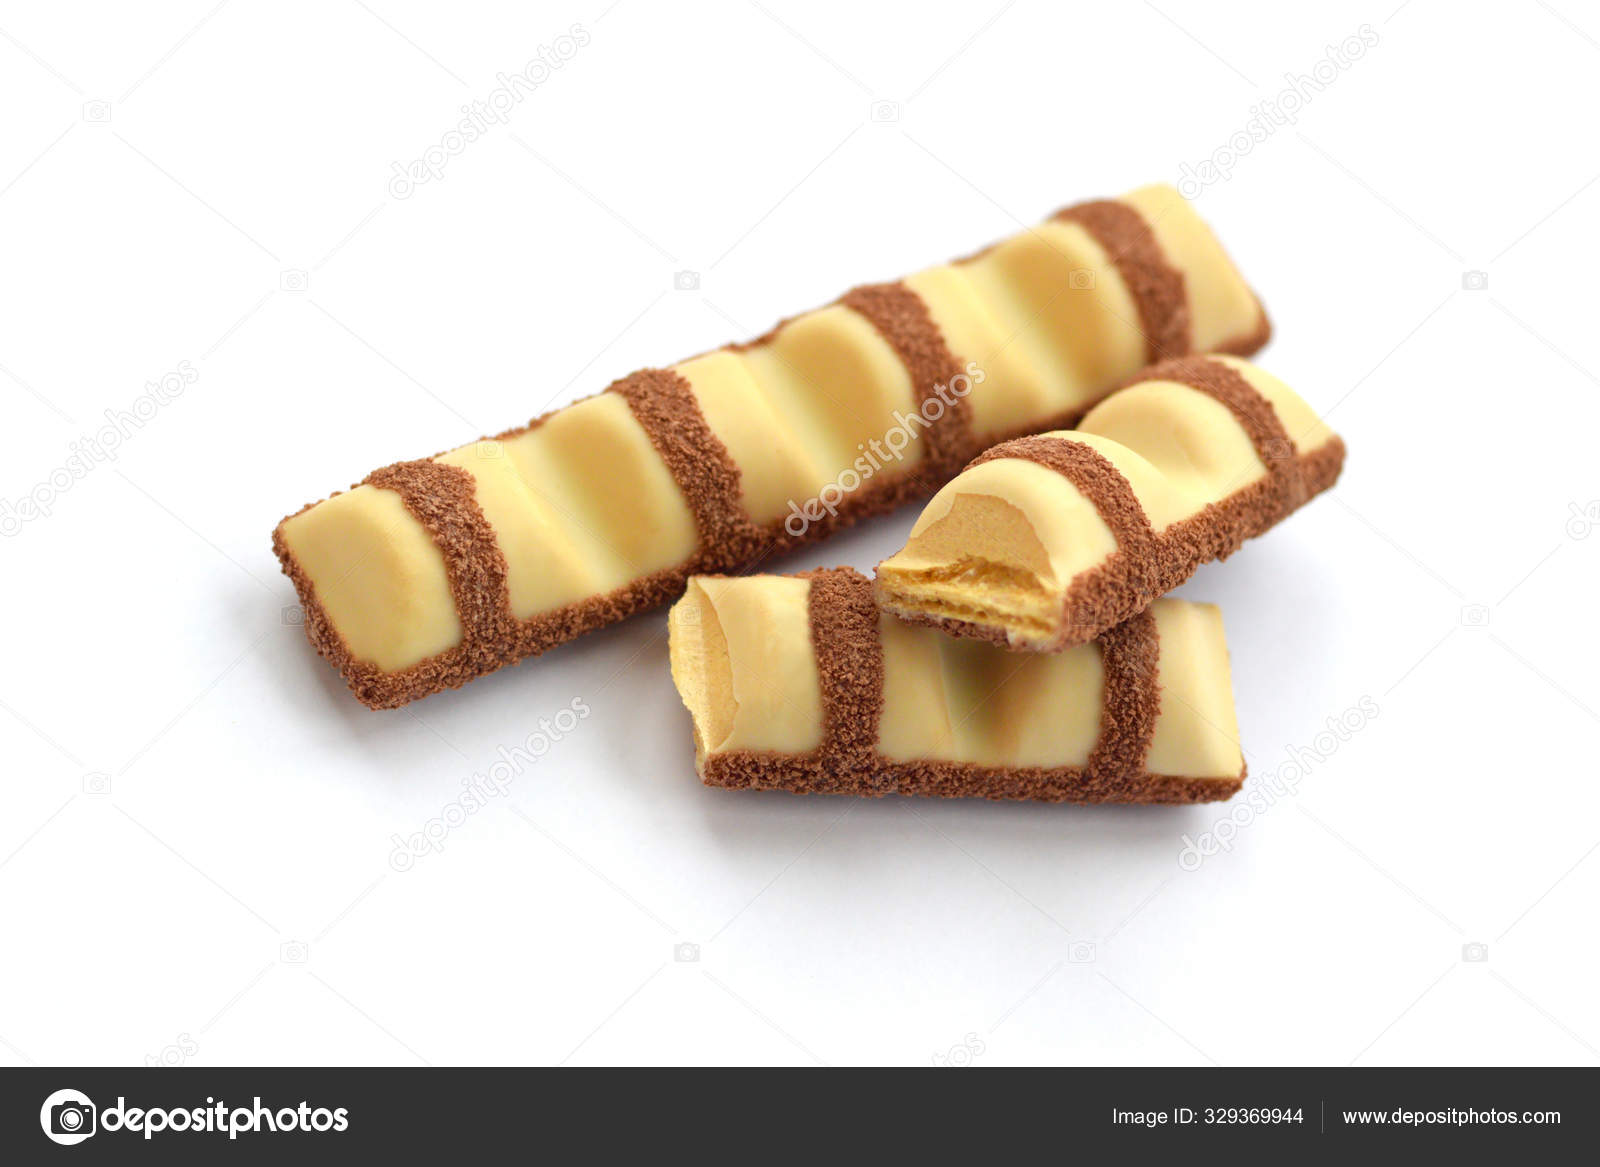 Kinder Bueno Chocolate Candy Bar On White Background. Kinder Bueno by  Italian Confectionery Manufacturer Ferrero – Stock Editorial Photo ©  Mehaniq #329369944